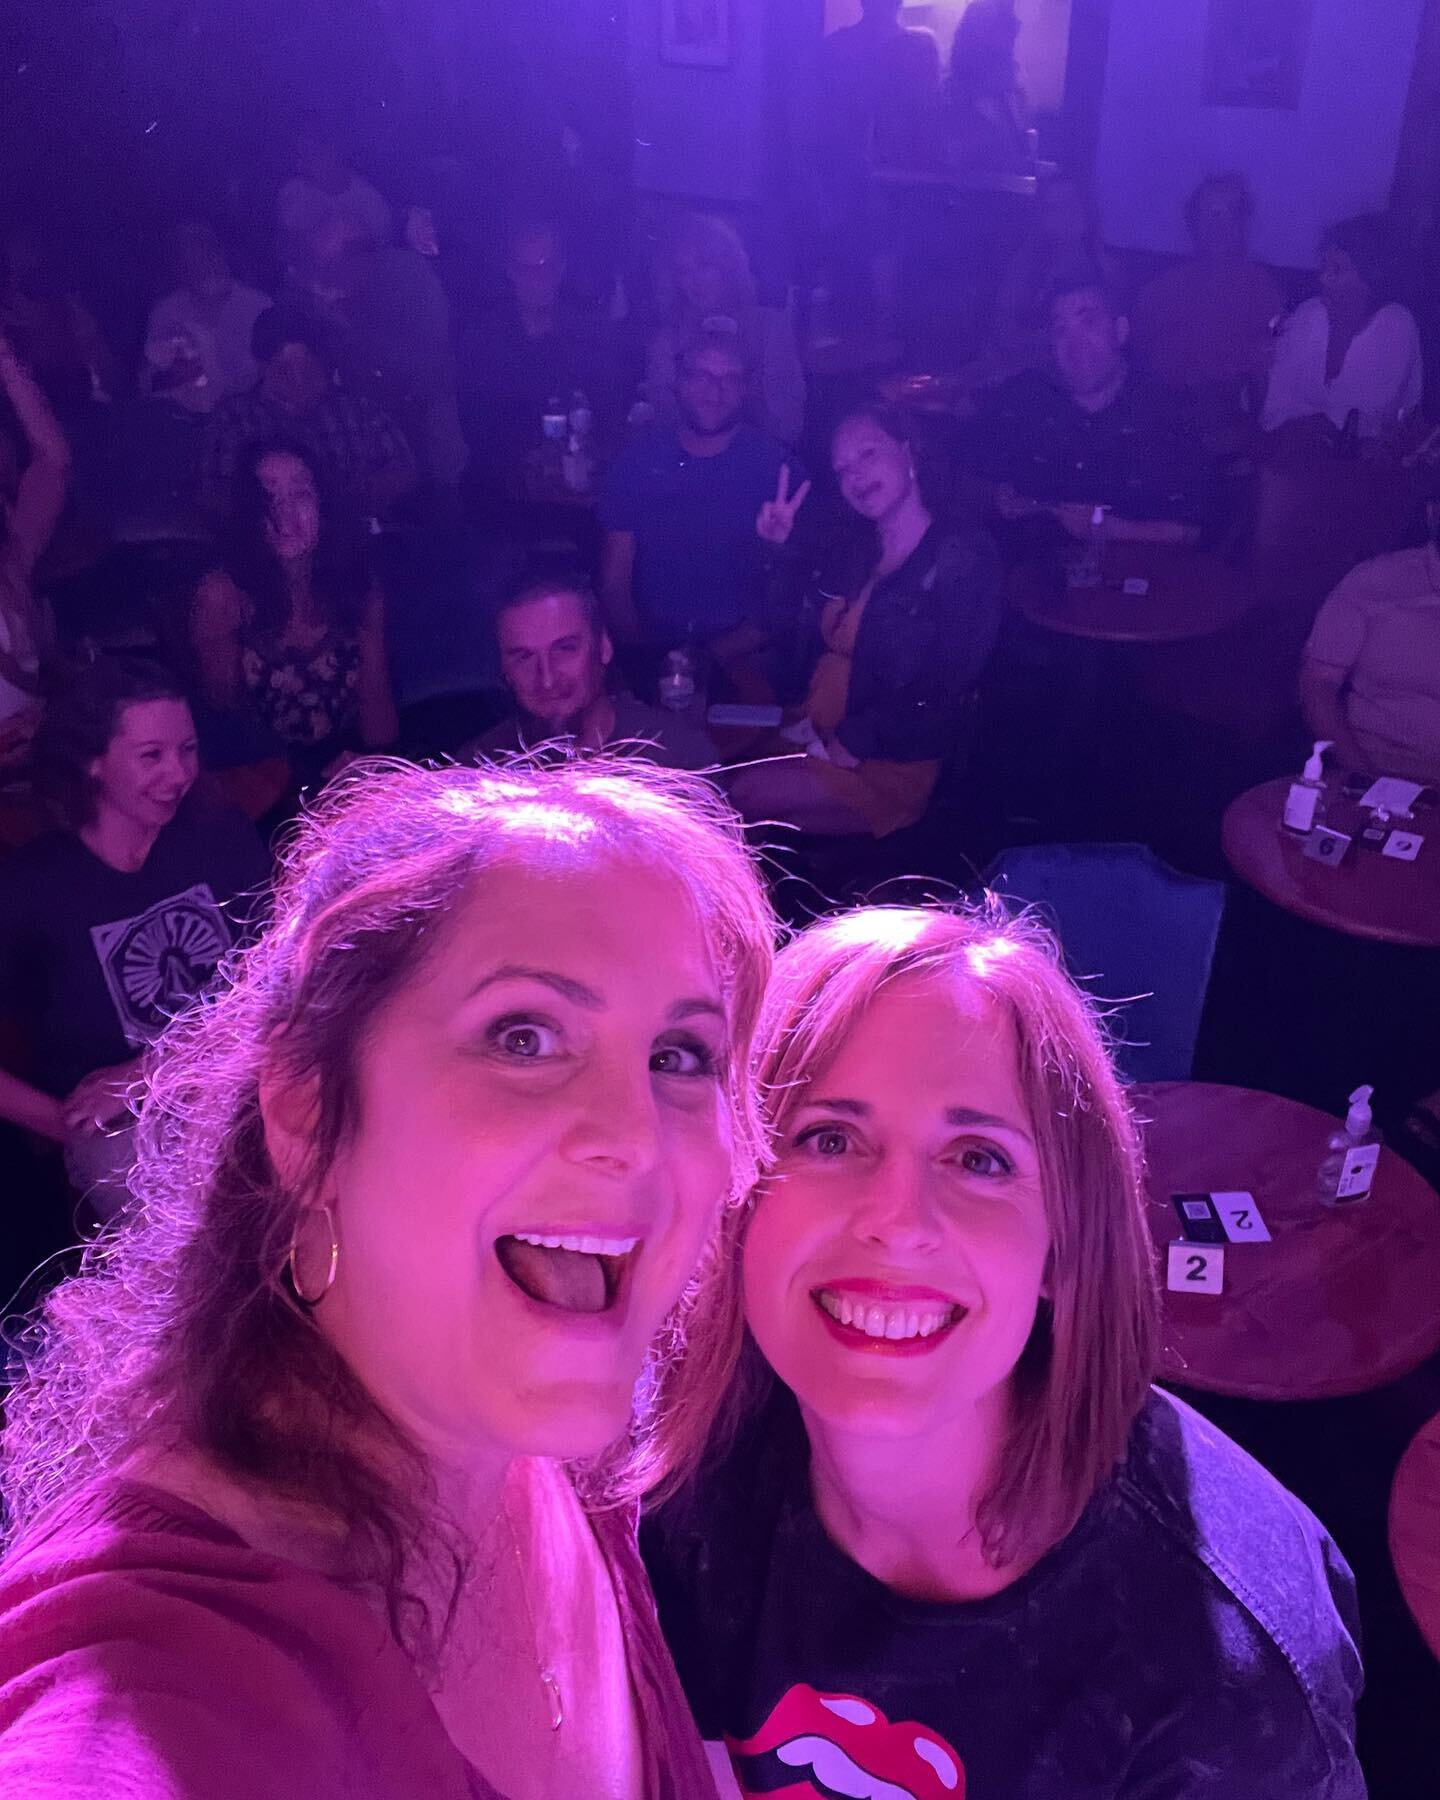 It was a fantastic first 𝗦𝗮𝗺 &amp; 𝗦𝗮𝗿𝗮𝗵 𝗦𝗵𝗼𝘄! A big thanks to to packed (and vaxxed) audience and the incredible @wendyliebman who had us constantly rolling with laughter! We were so lucky to have the hilarious @raneirpollard (and his da